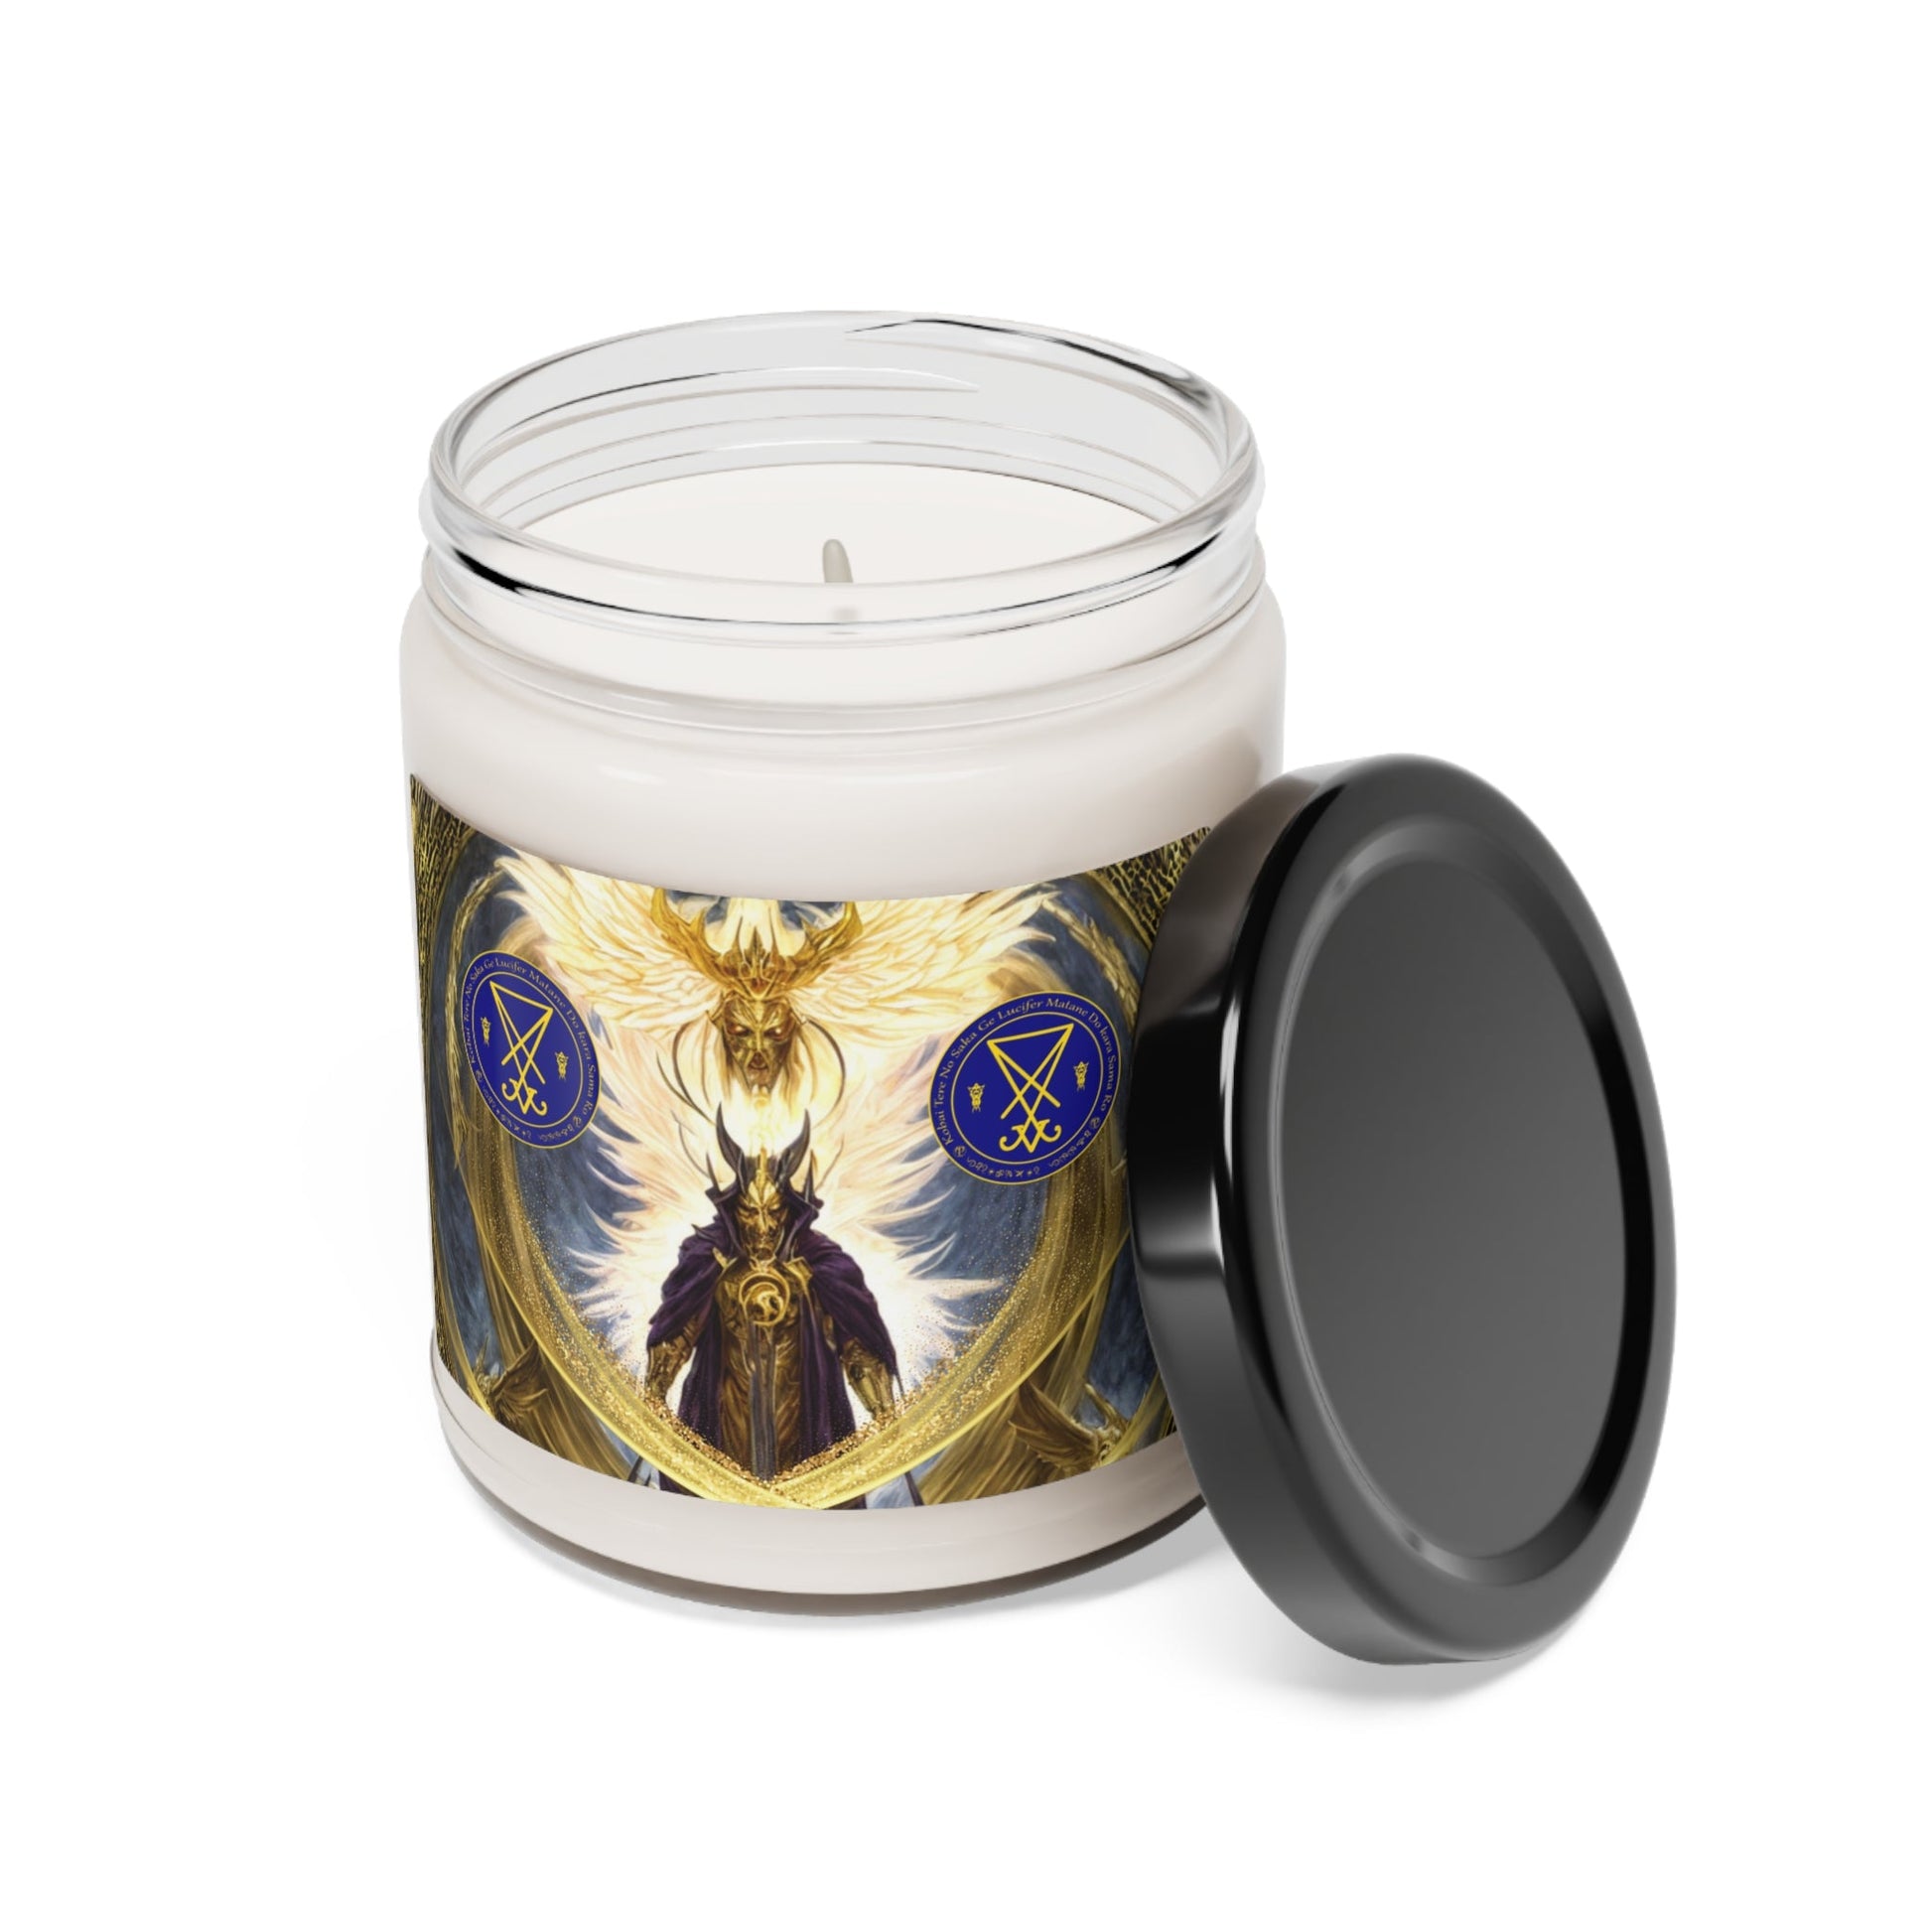 Demon-Lucifer-Scented-Soy-Candle-for-Altar-offerings-rituals-initiations-or-praying-and-meditation-22